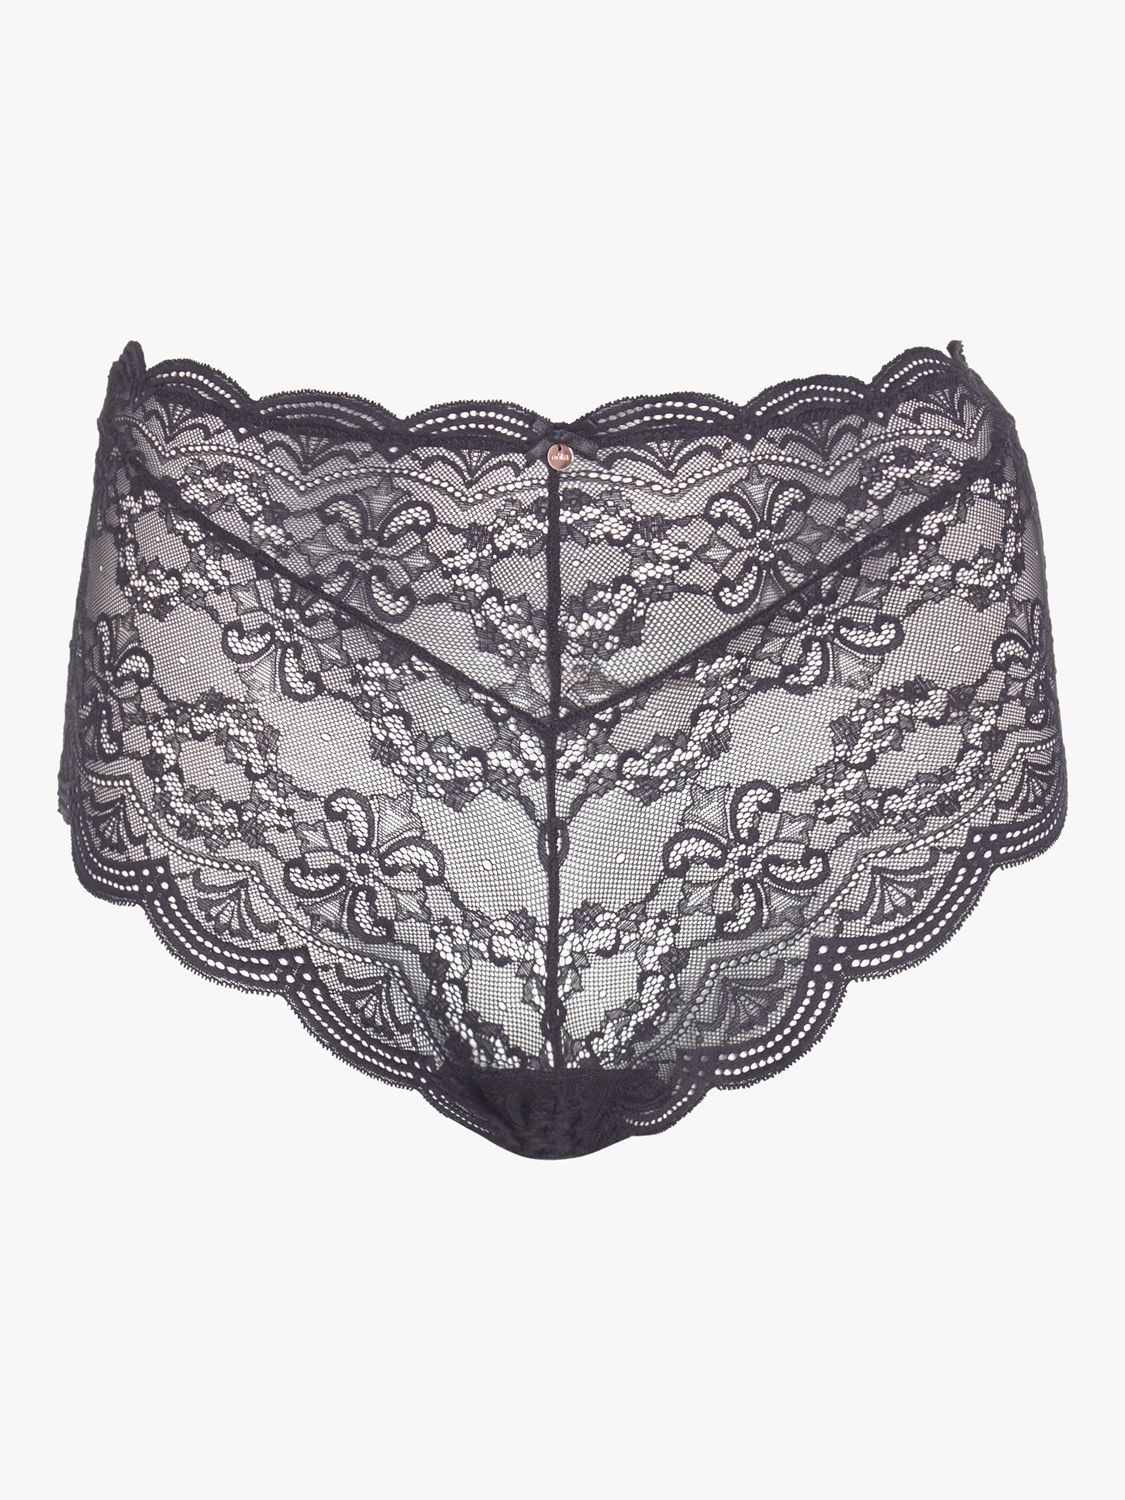 Buy Oola Lingerie Scallop Lace Short Knickers Online at johnlewis.com